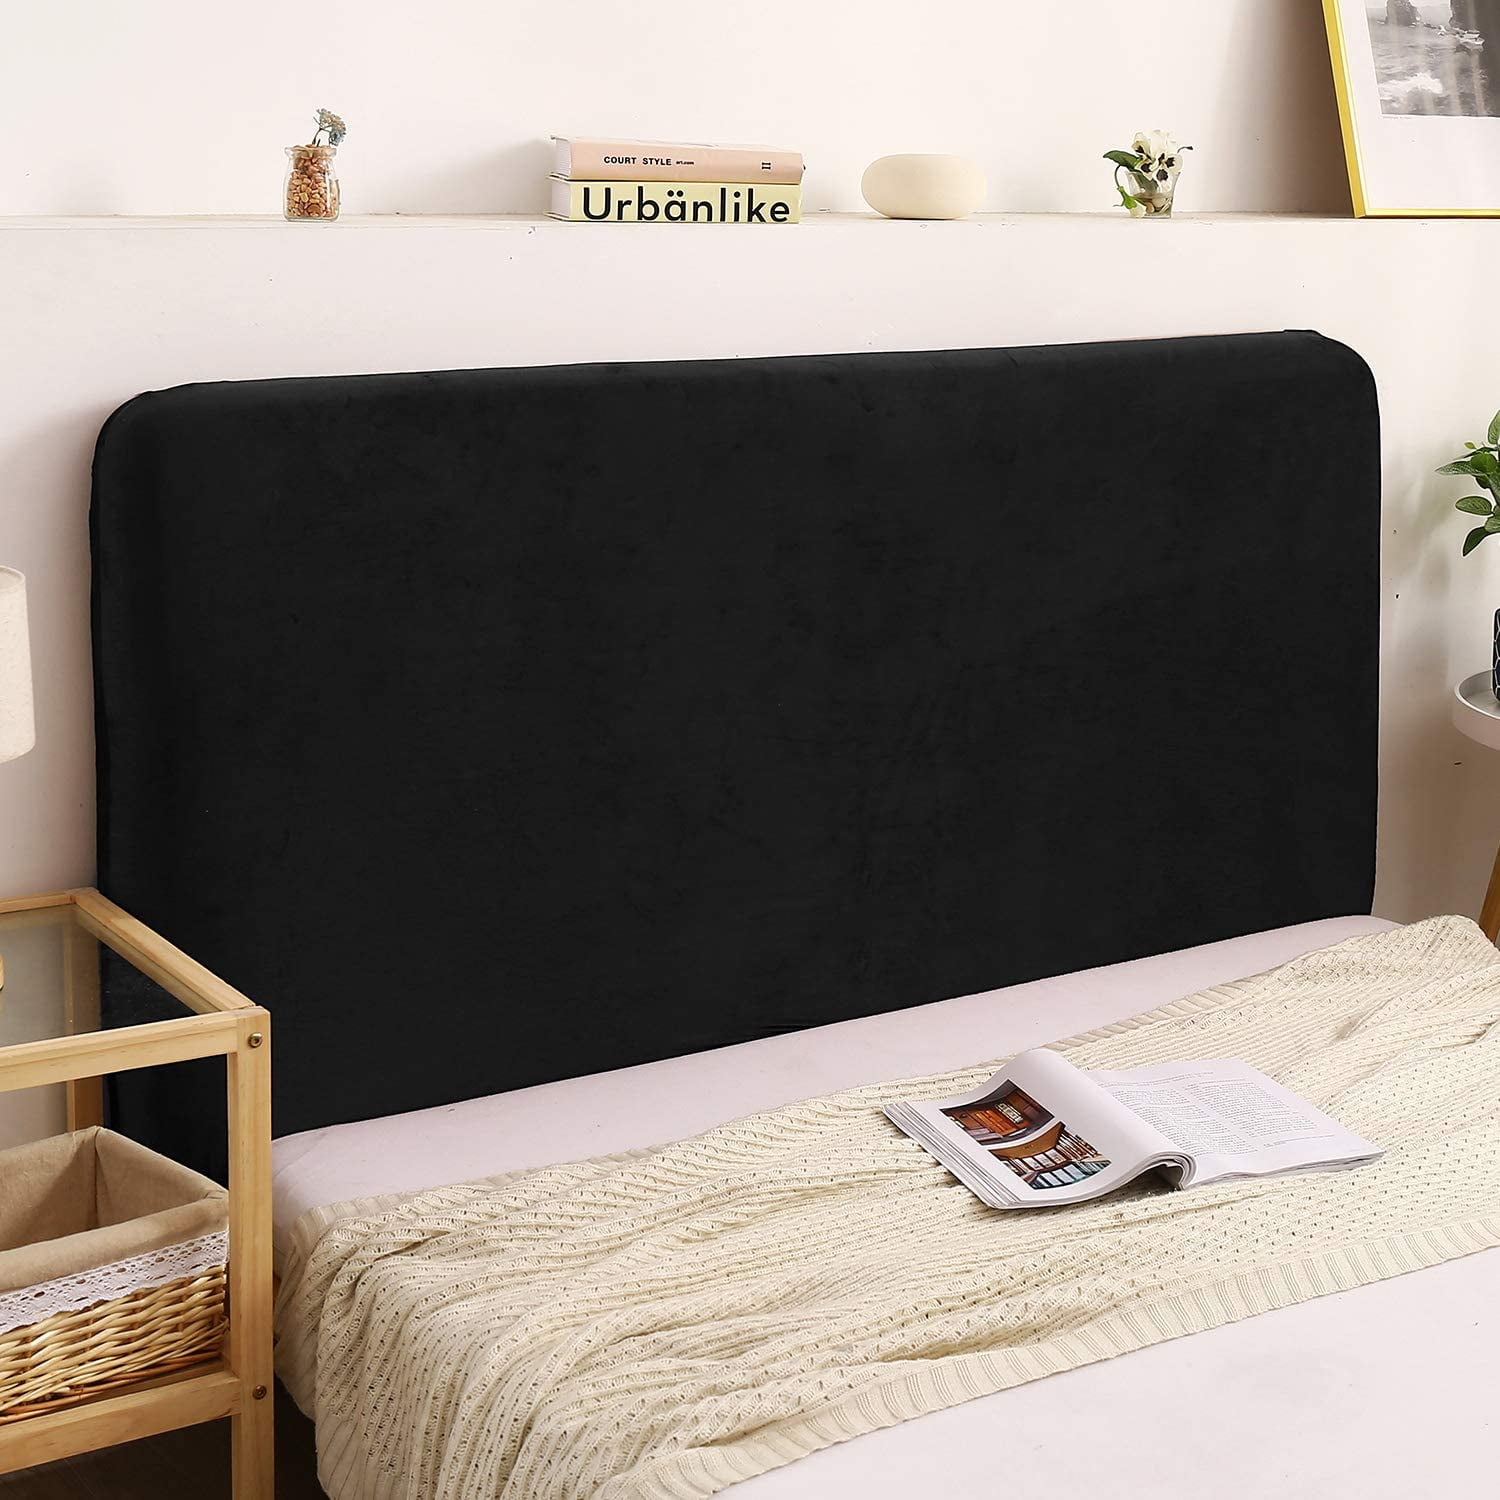 Stretch Bedroom Headboard Cover Protector Soft Dust Cover 55-67" Width Beige 